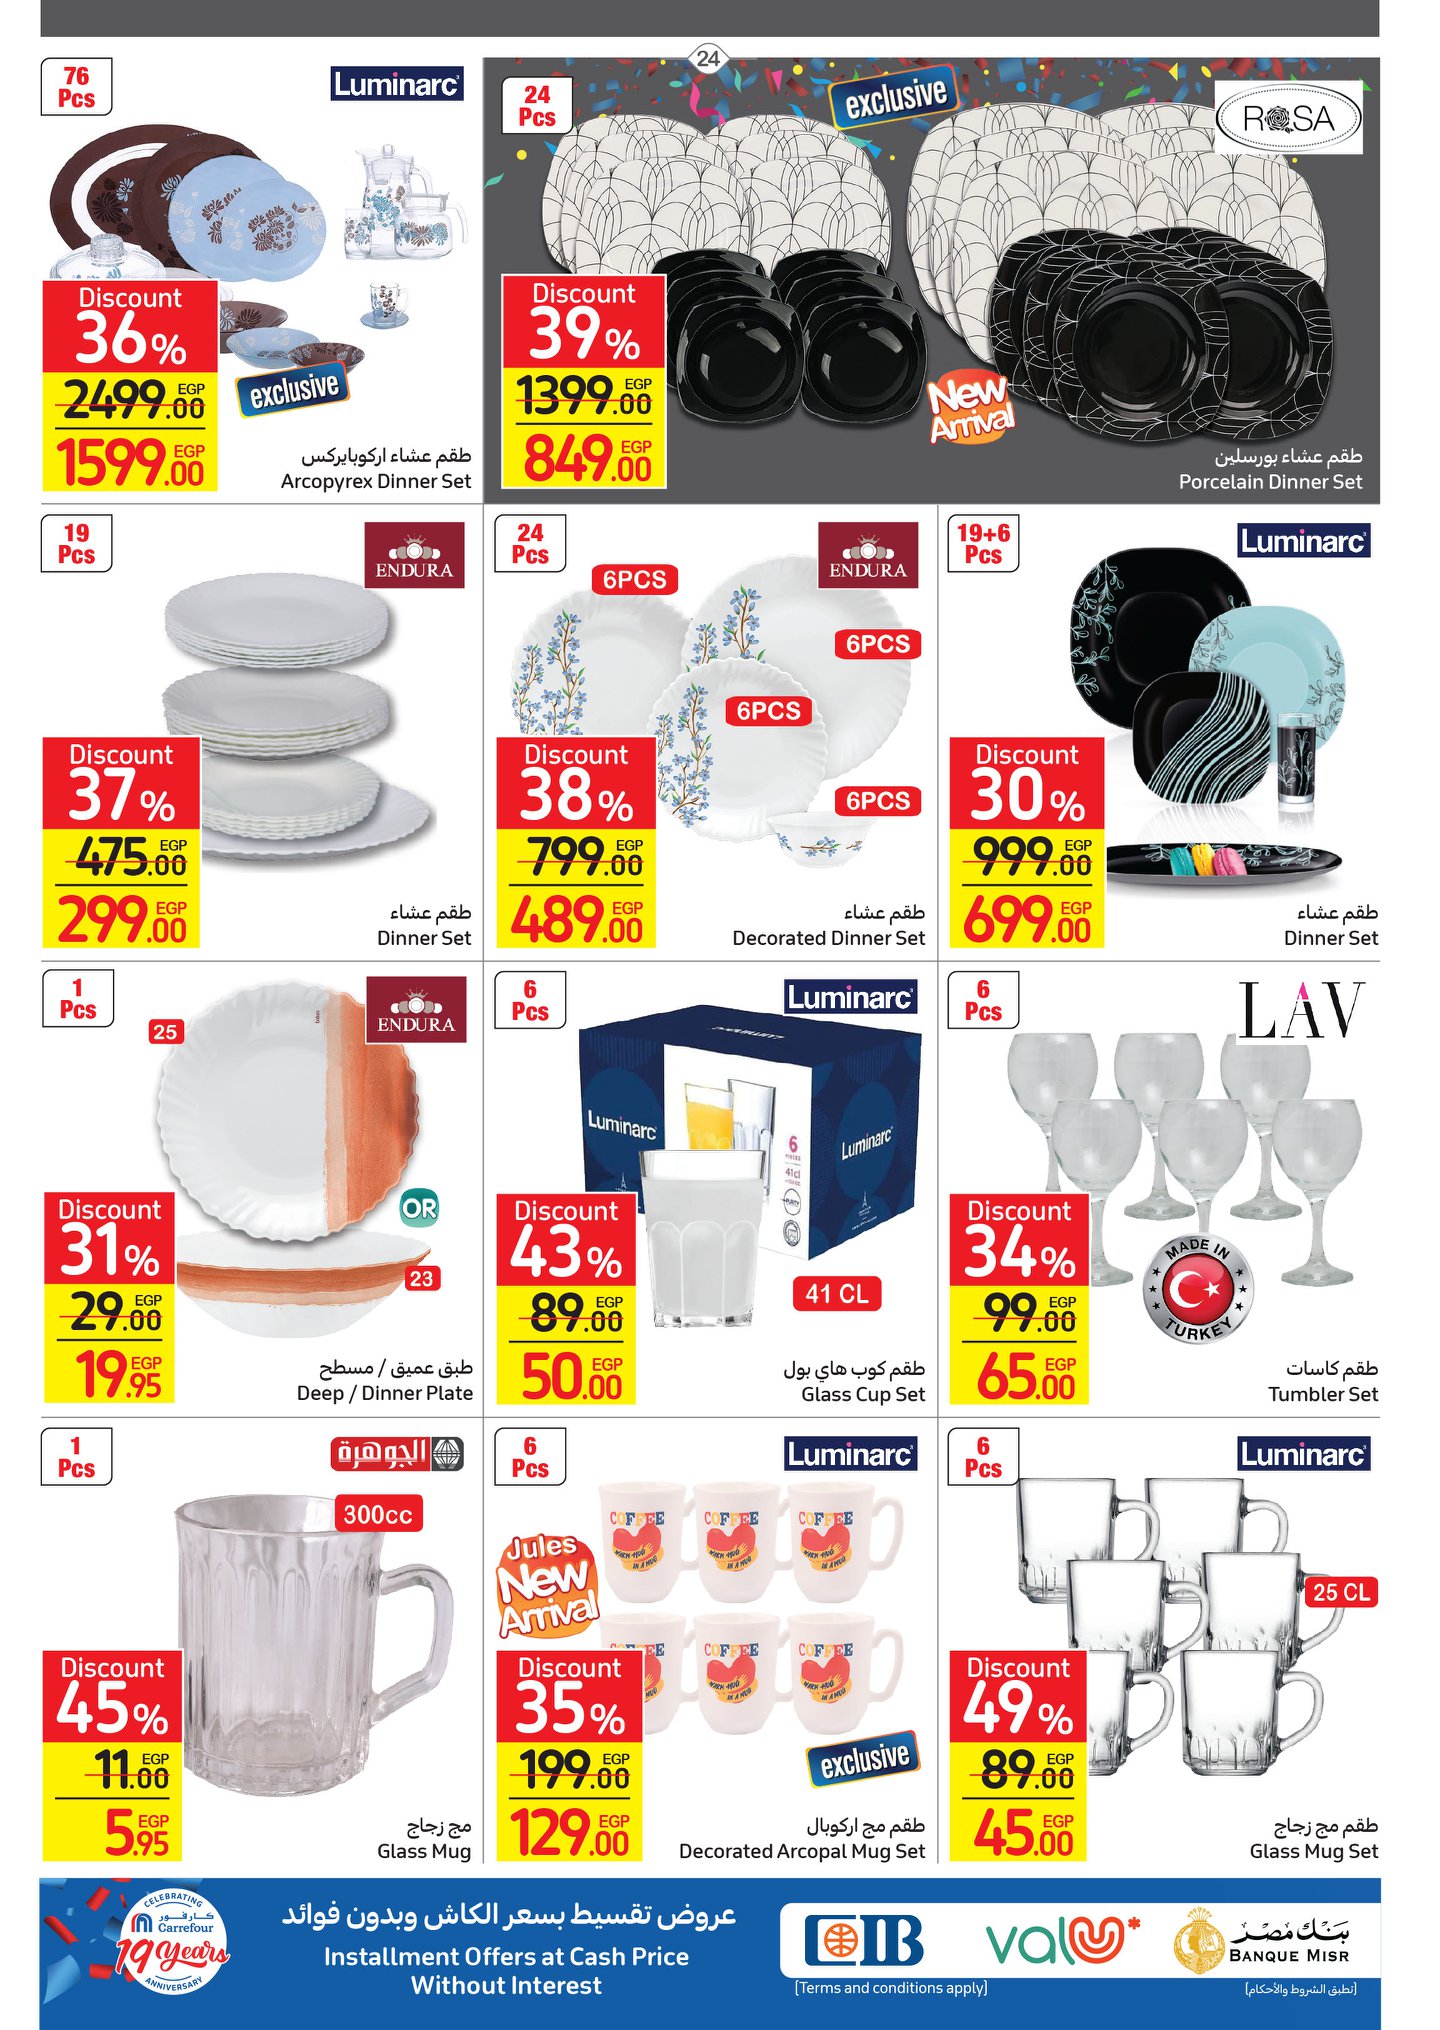 Carrefour magazine offers complete with 50% discounts and a surprise purchase in convenient installments without interest 29